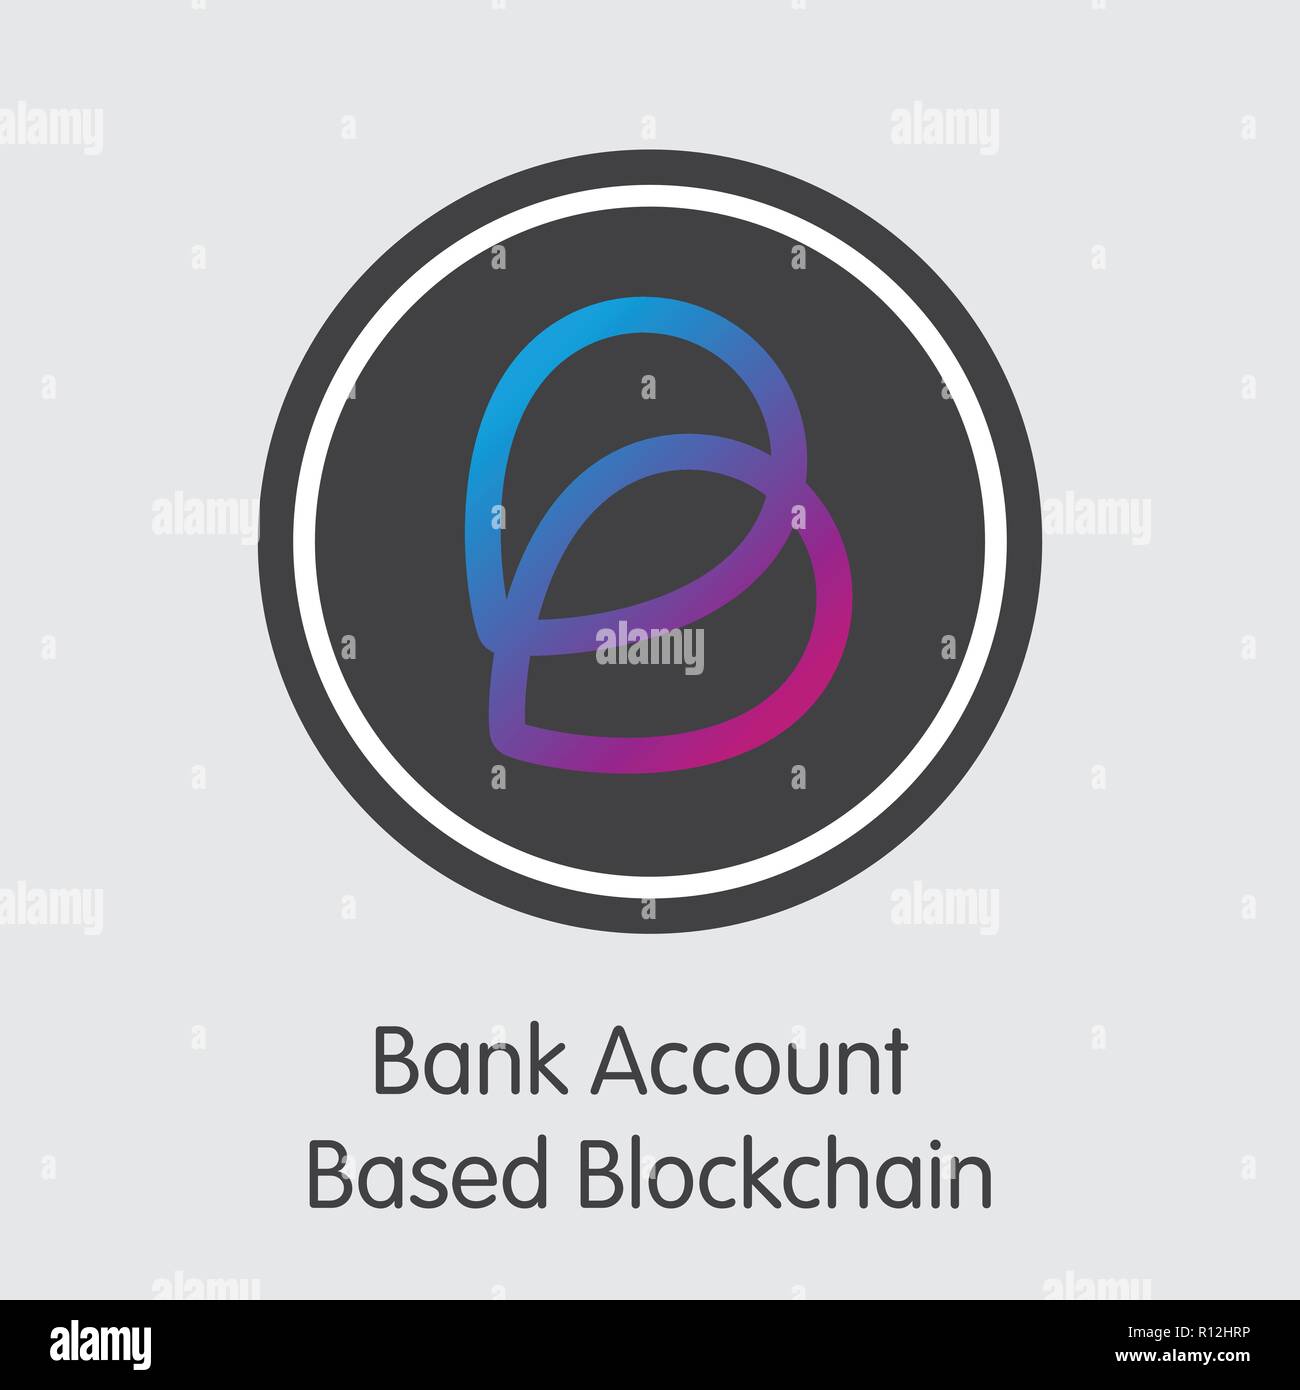 Bank Account Based Blockchain - Cryptocurrency Illustration. Vector Icon Stock Vector